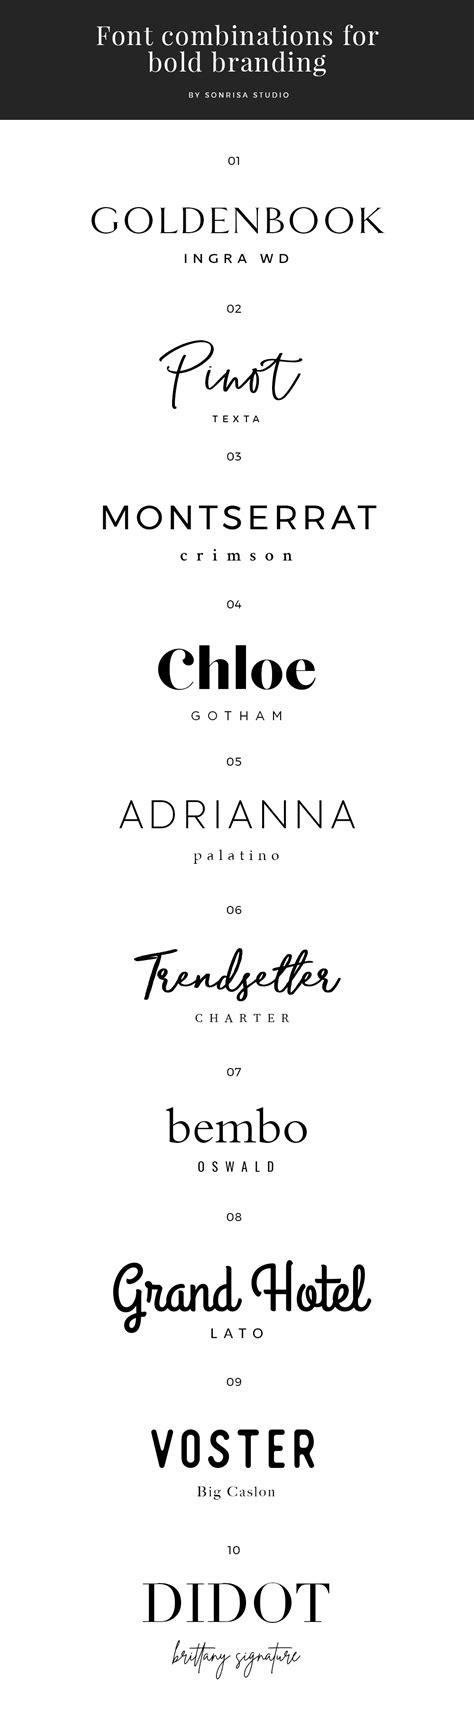 Font Combinations For Bold Branding